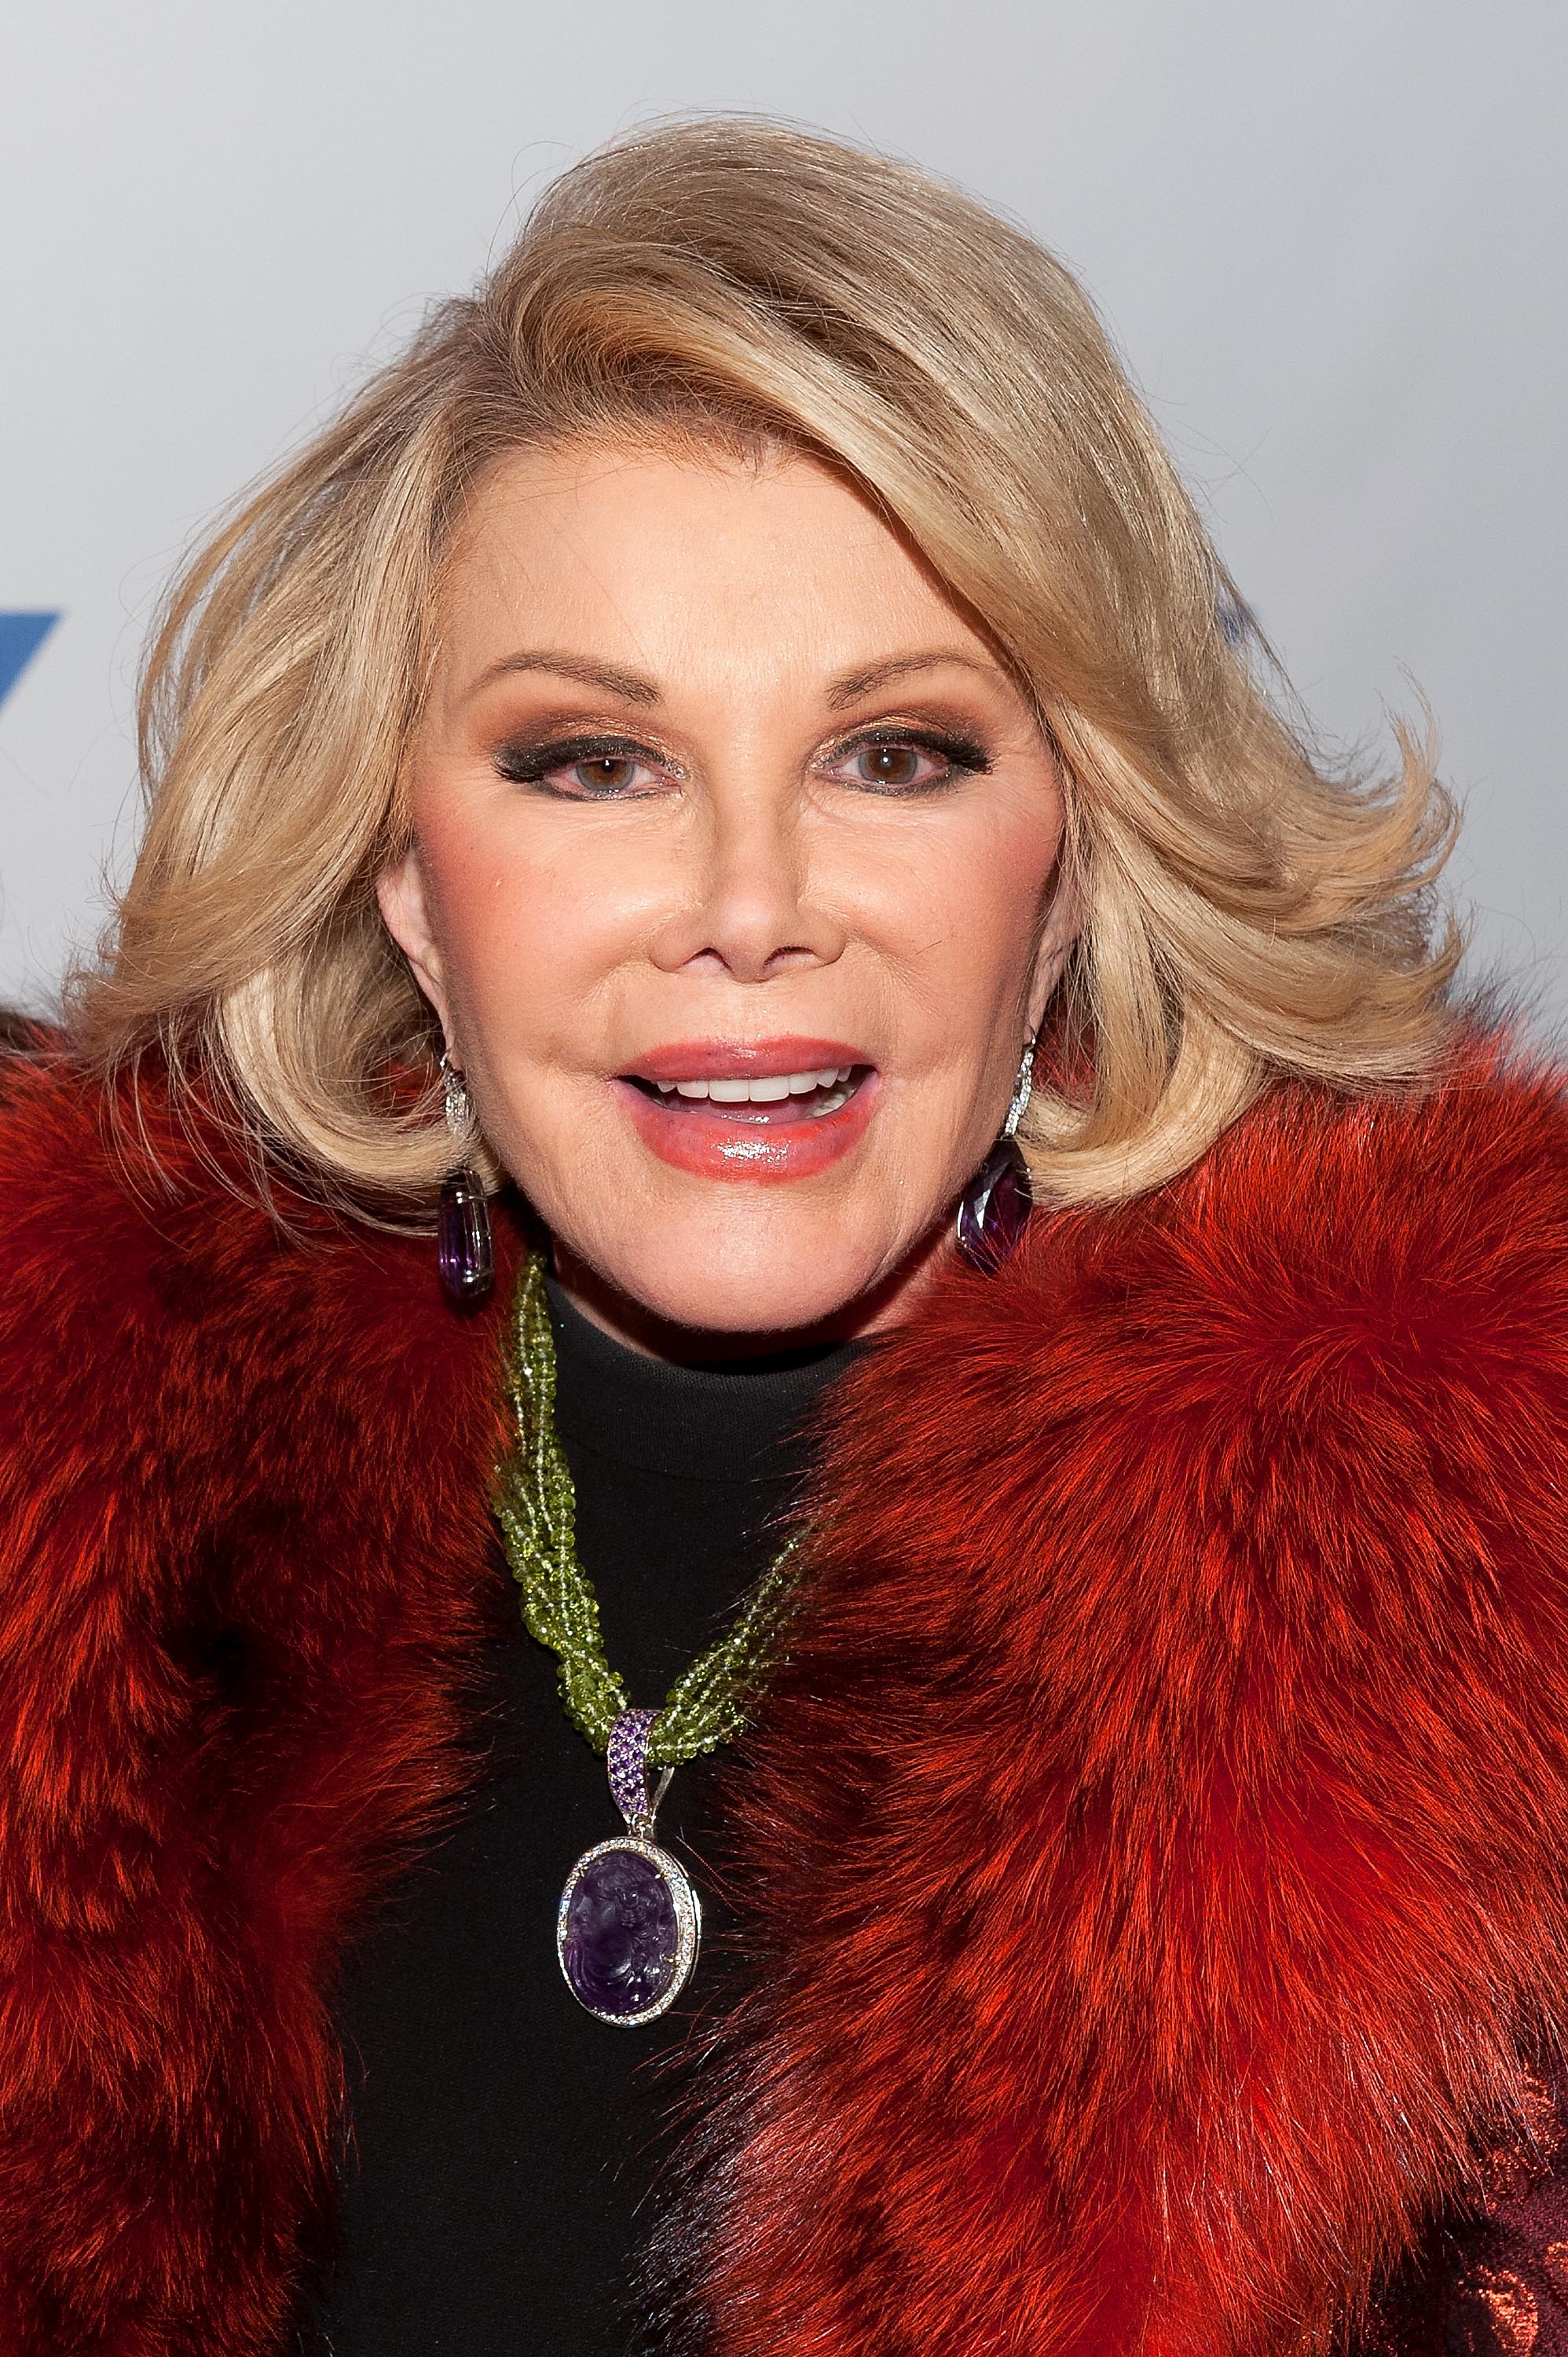 Joan Rivers attends An Evening With Joan And Melissa Rivers at the 92nd Street Y on Jan. 22, 2014 in New York City. (D Dipasupil—FilmMagic/Getty images)